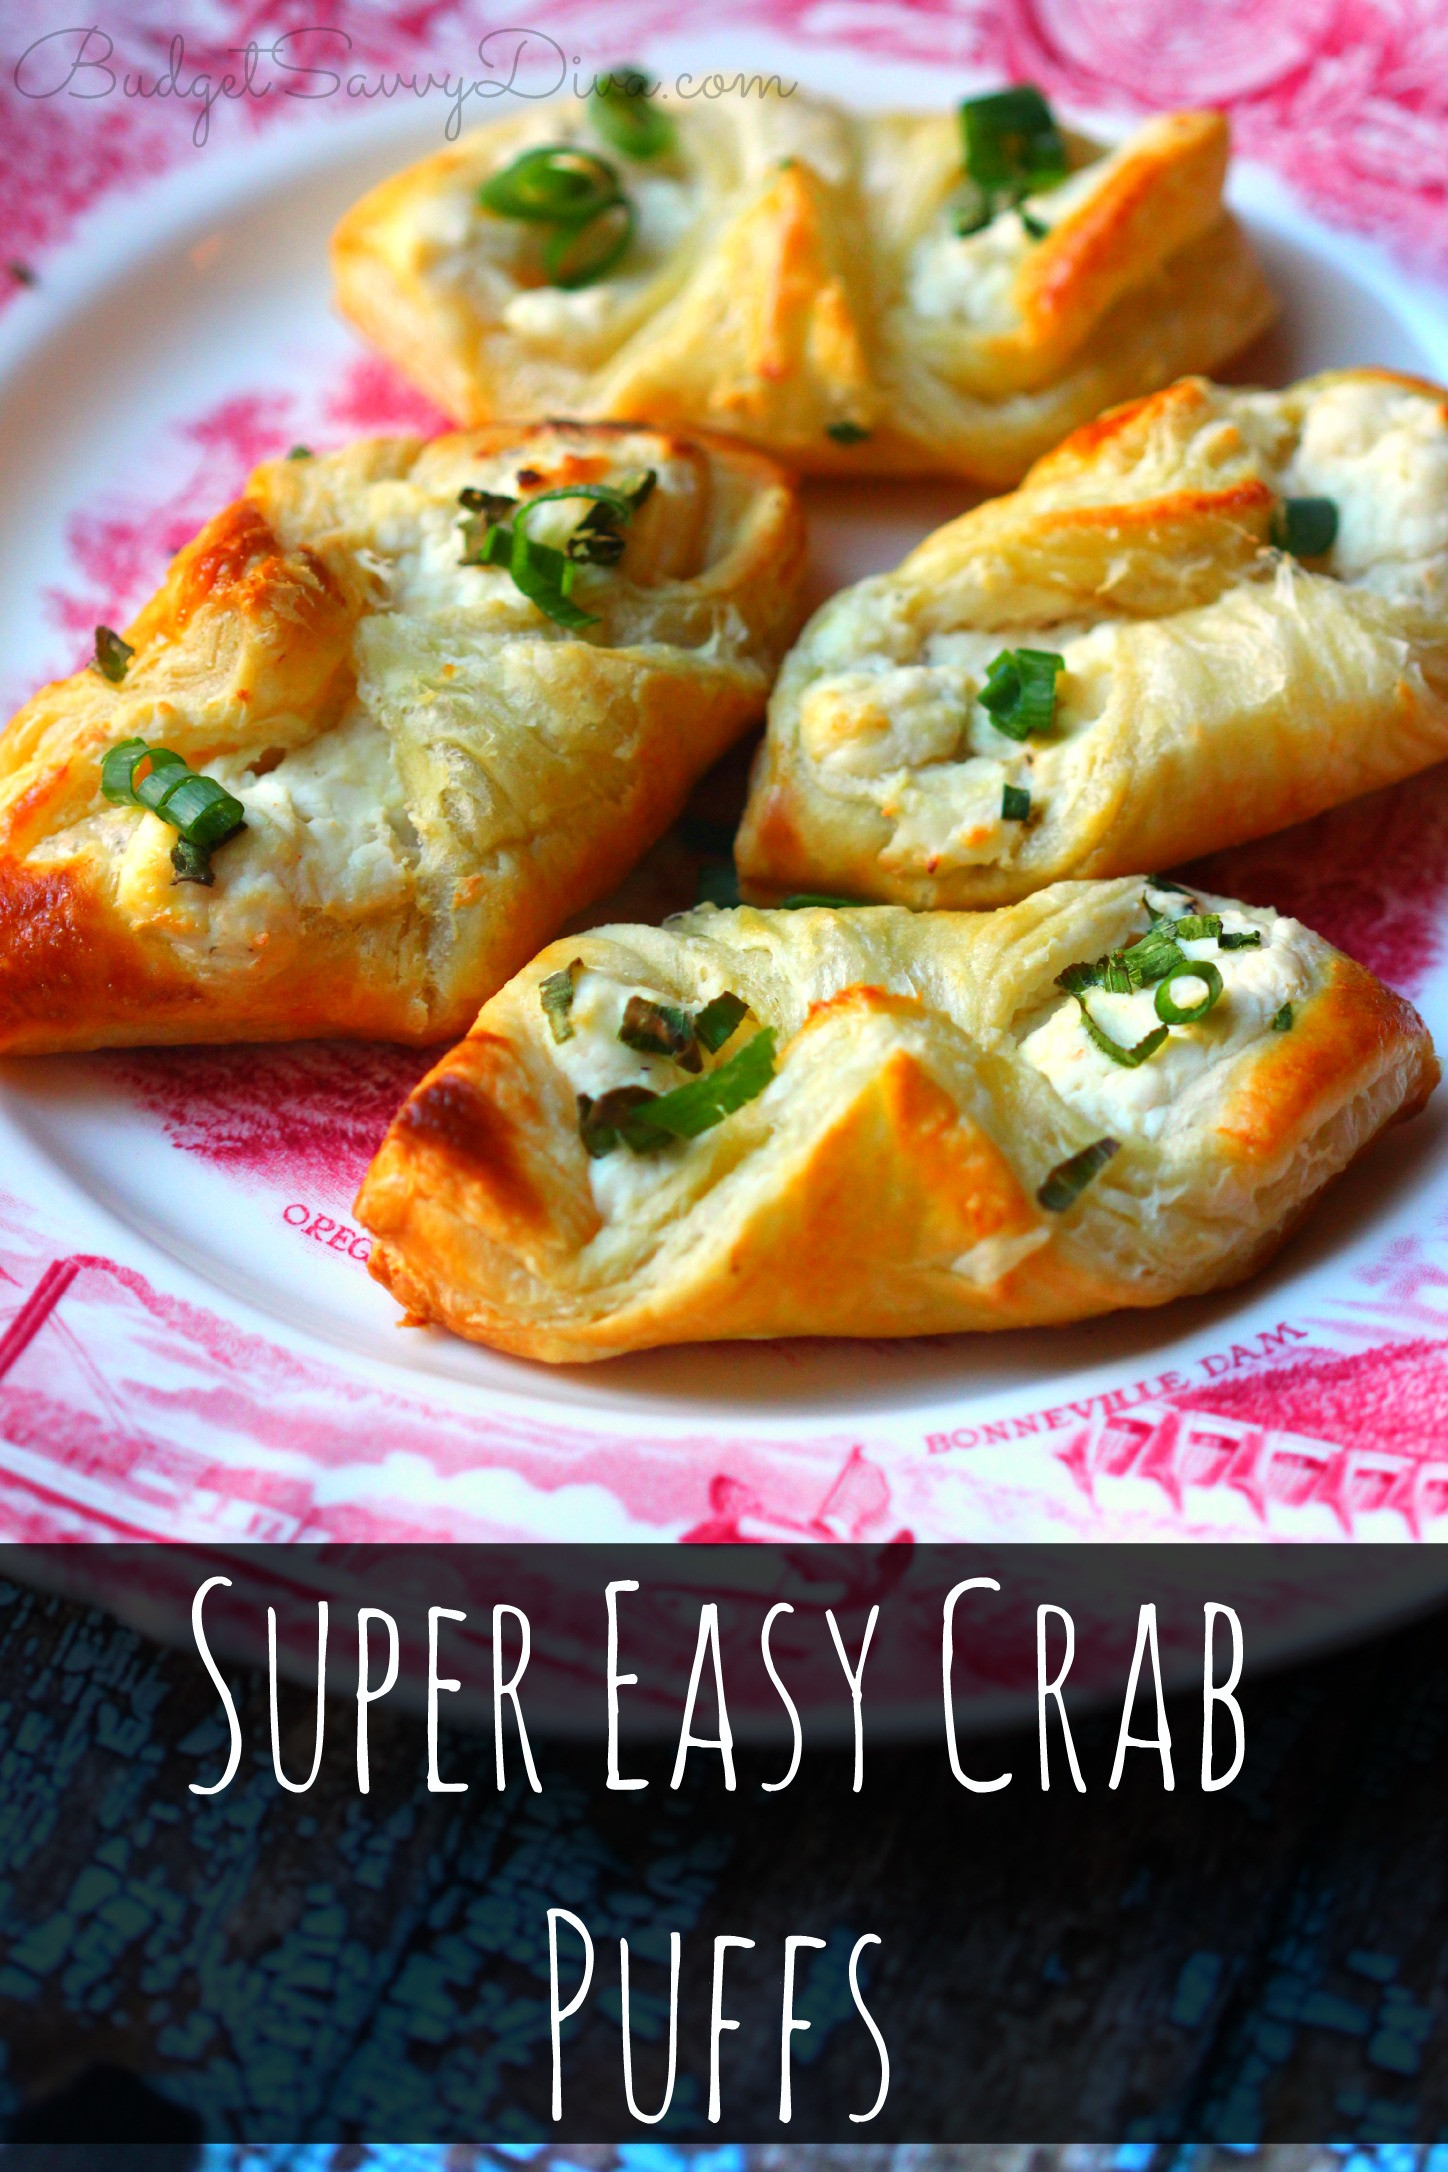 Puff Pastry Appetizers Recipe
 Super Easy Crab Puffs Recipe Bud Savvy Diva